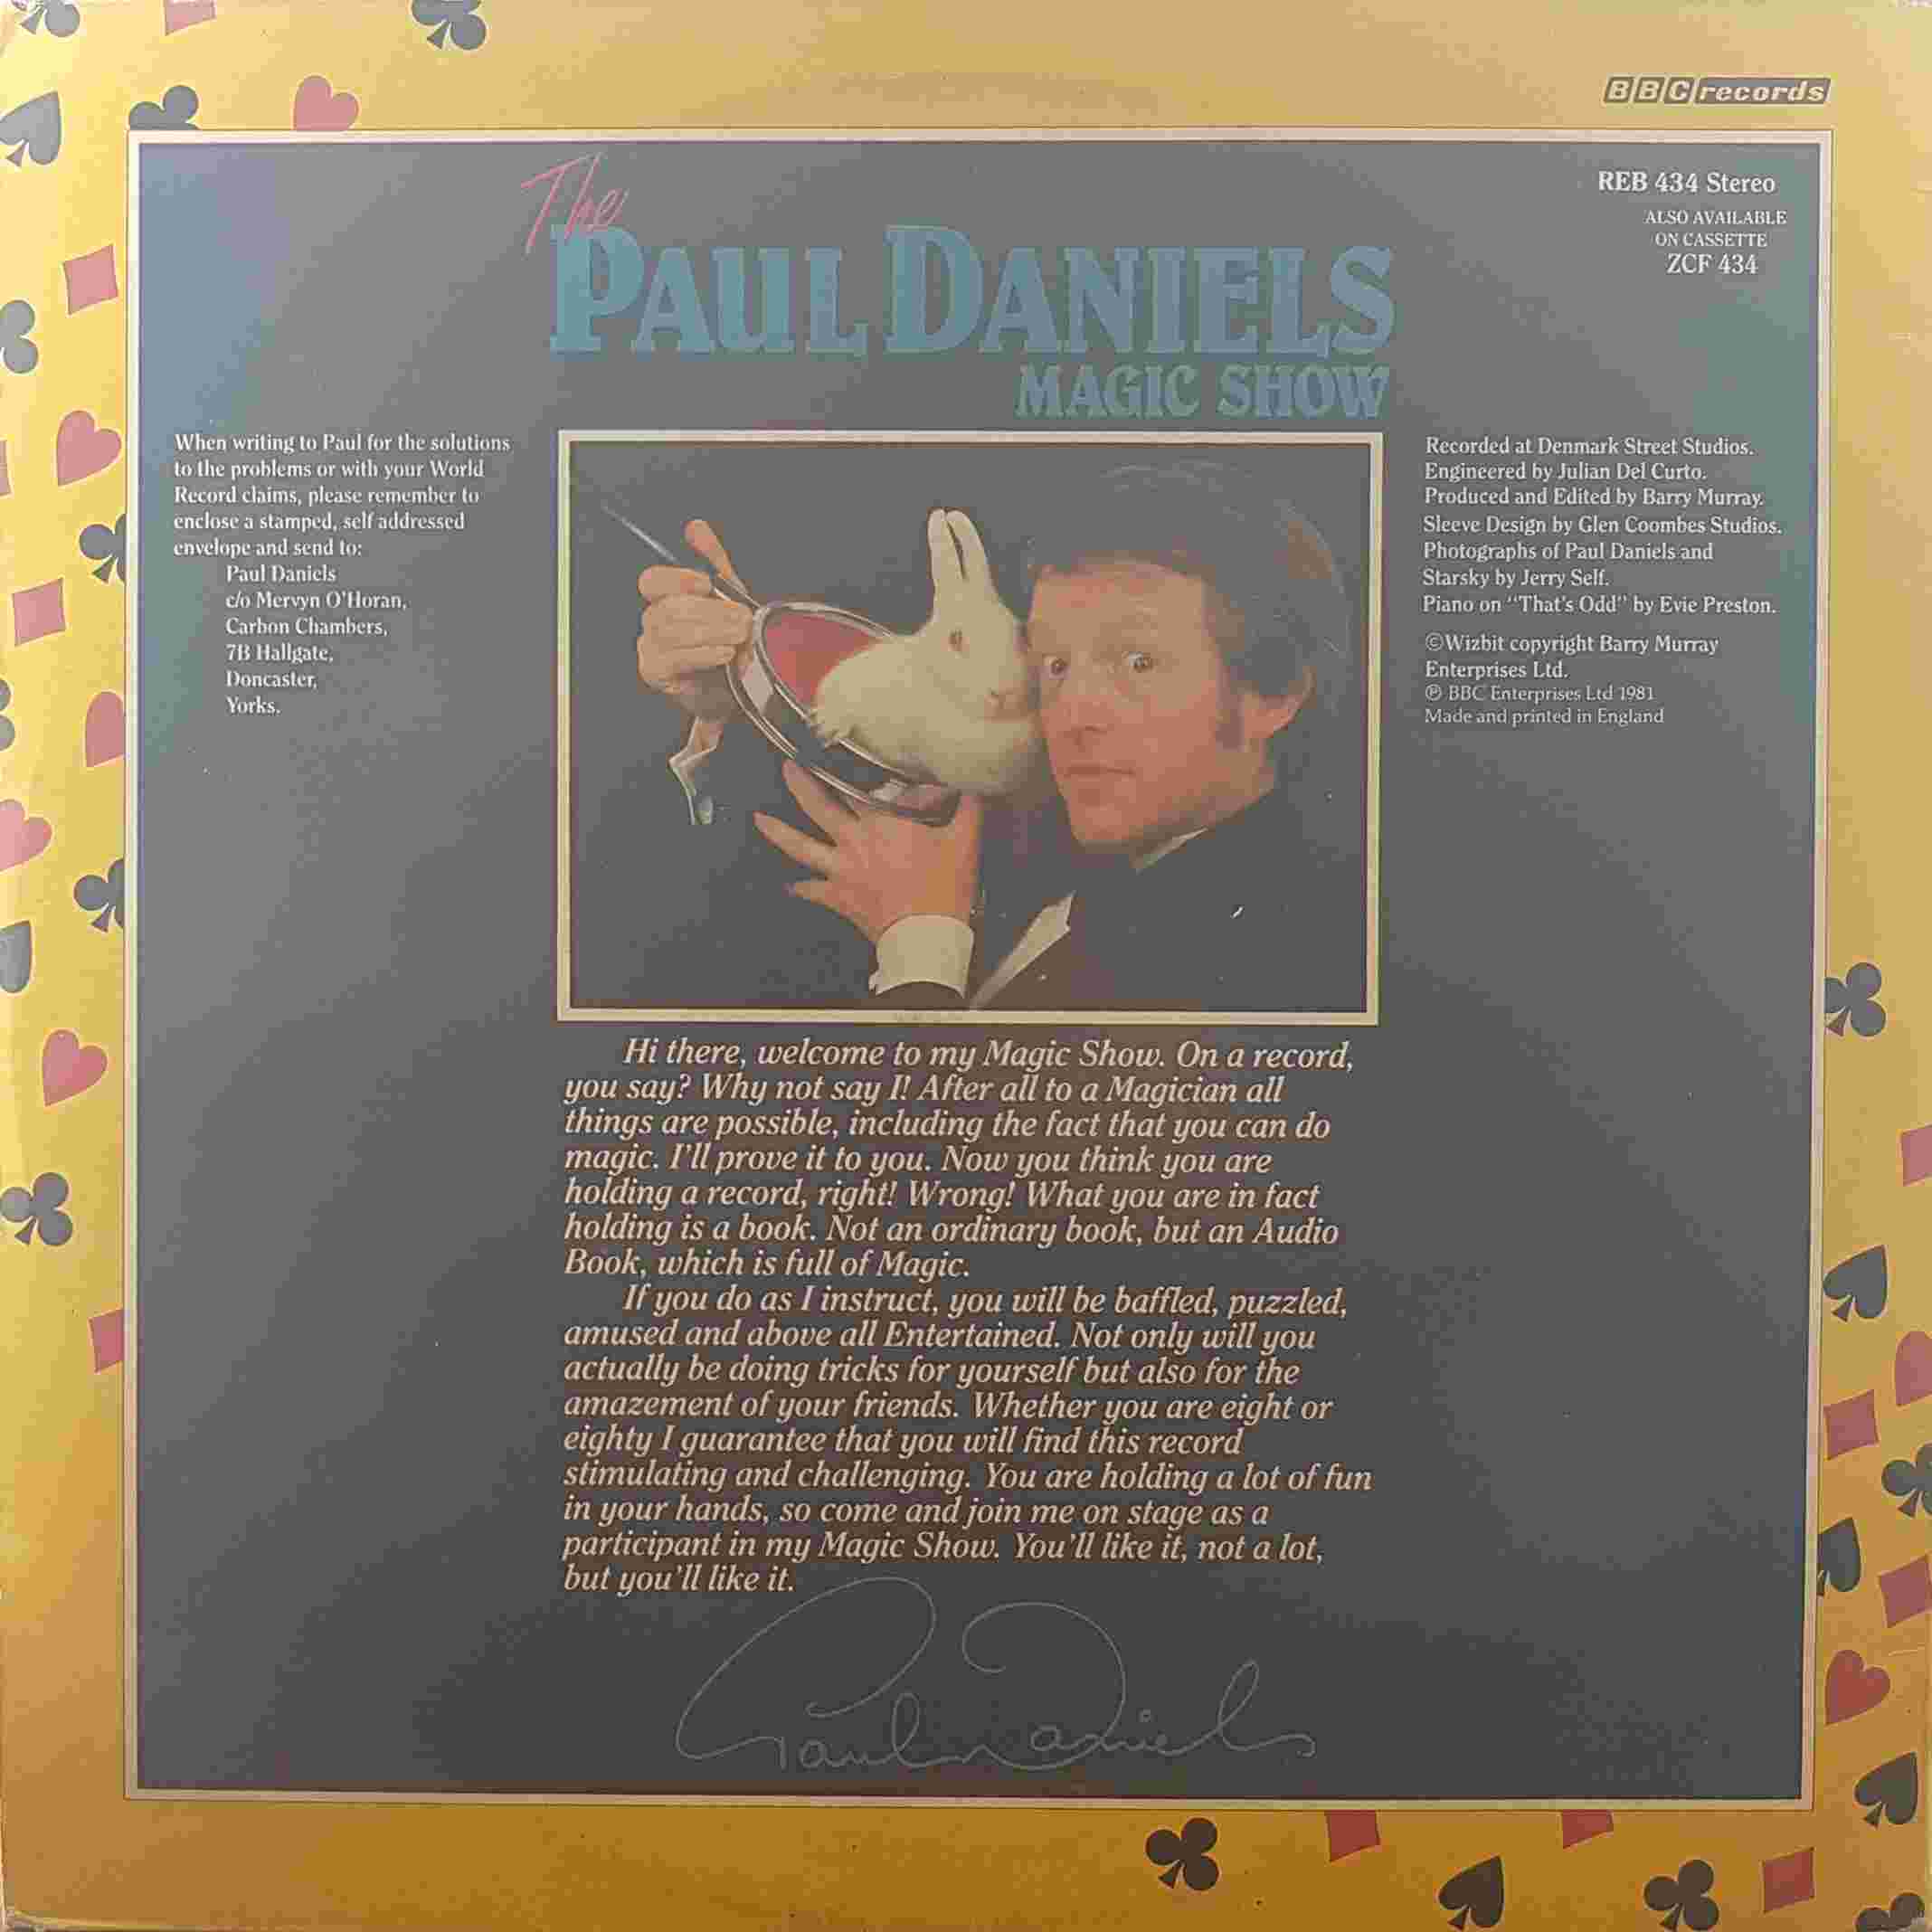 Picture of REB 434 The Paul Daniels magic show by artist Paul Daniels from the BBC records and Tapes library